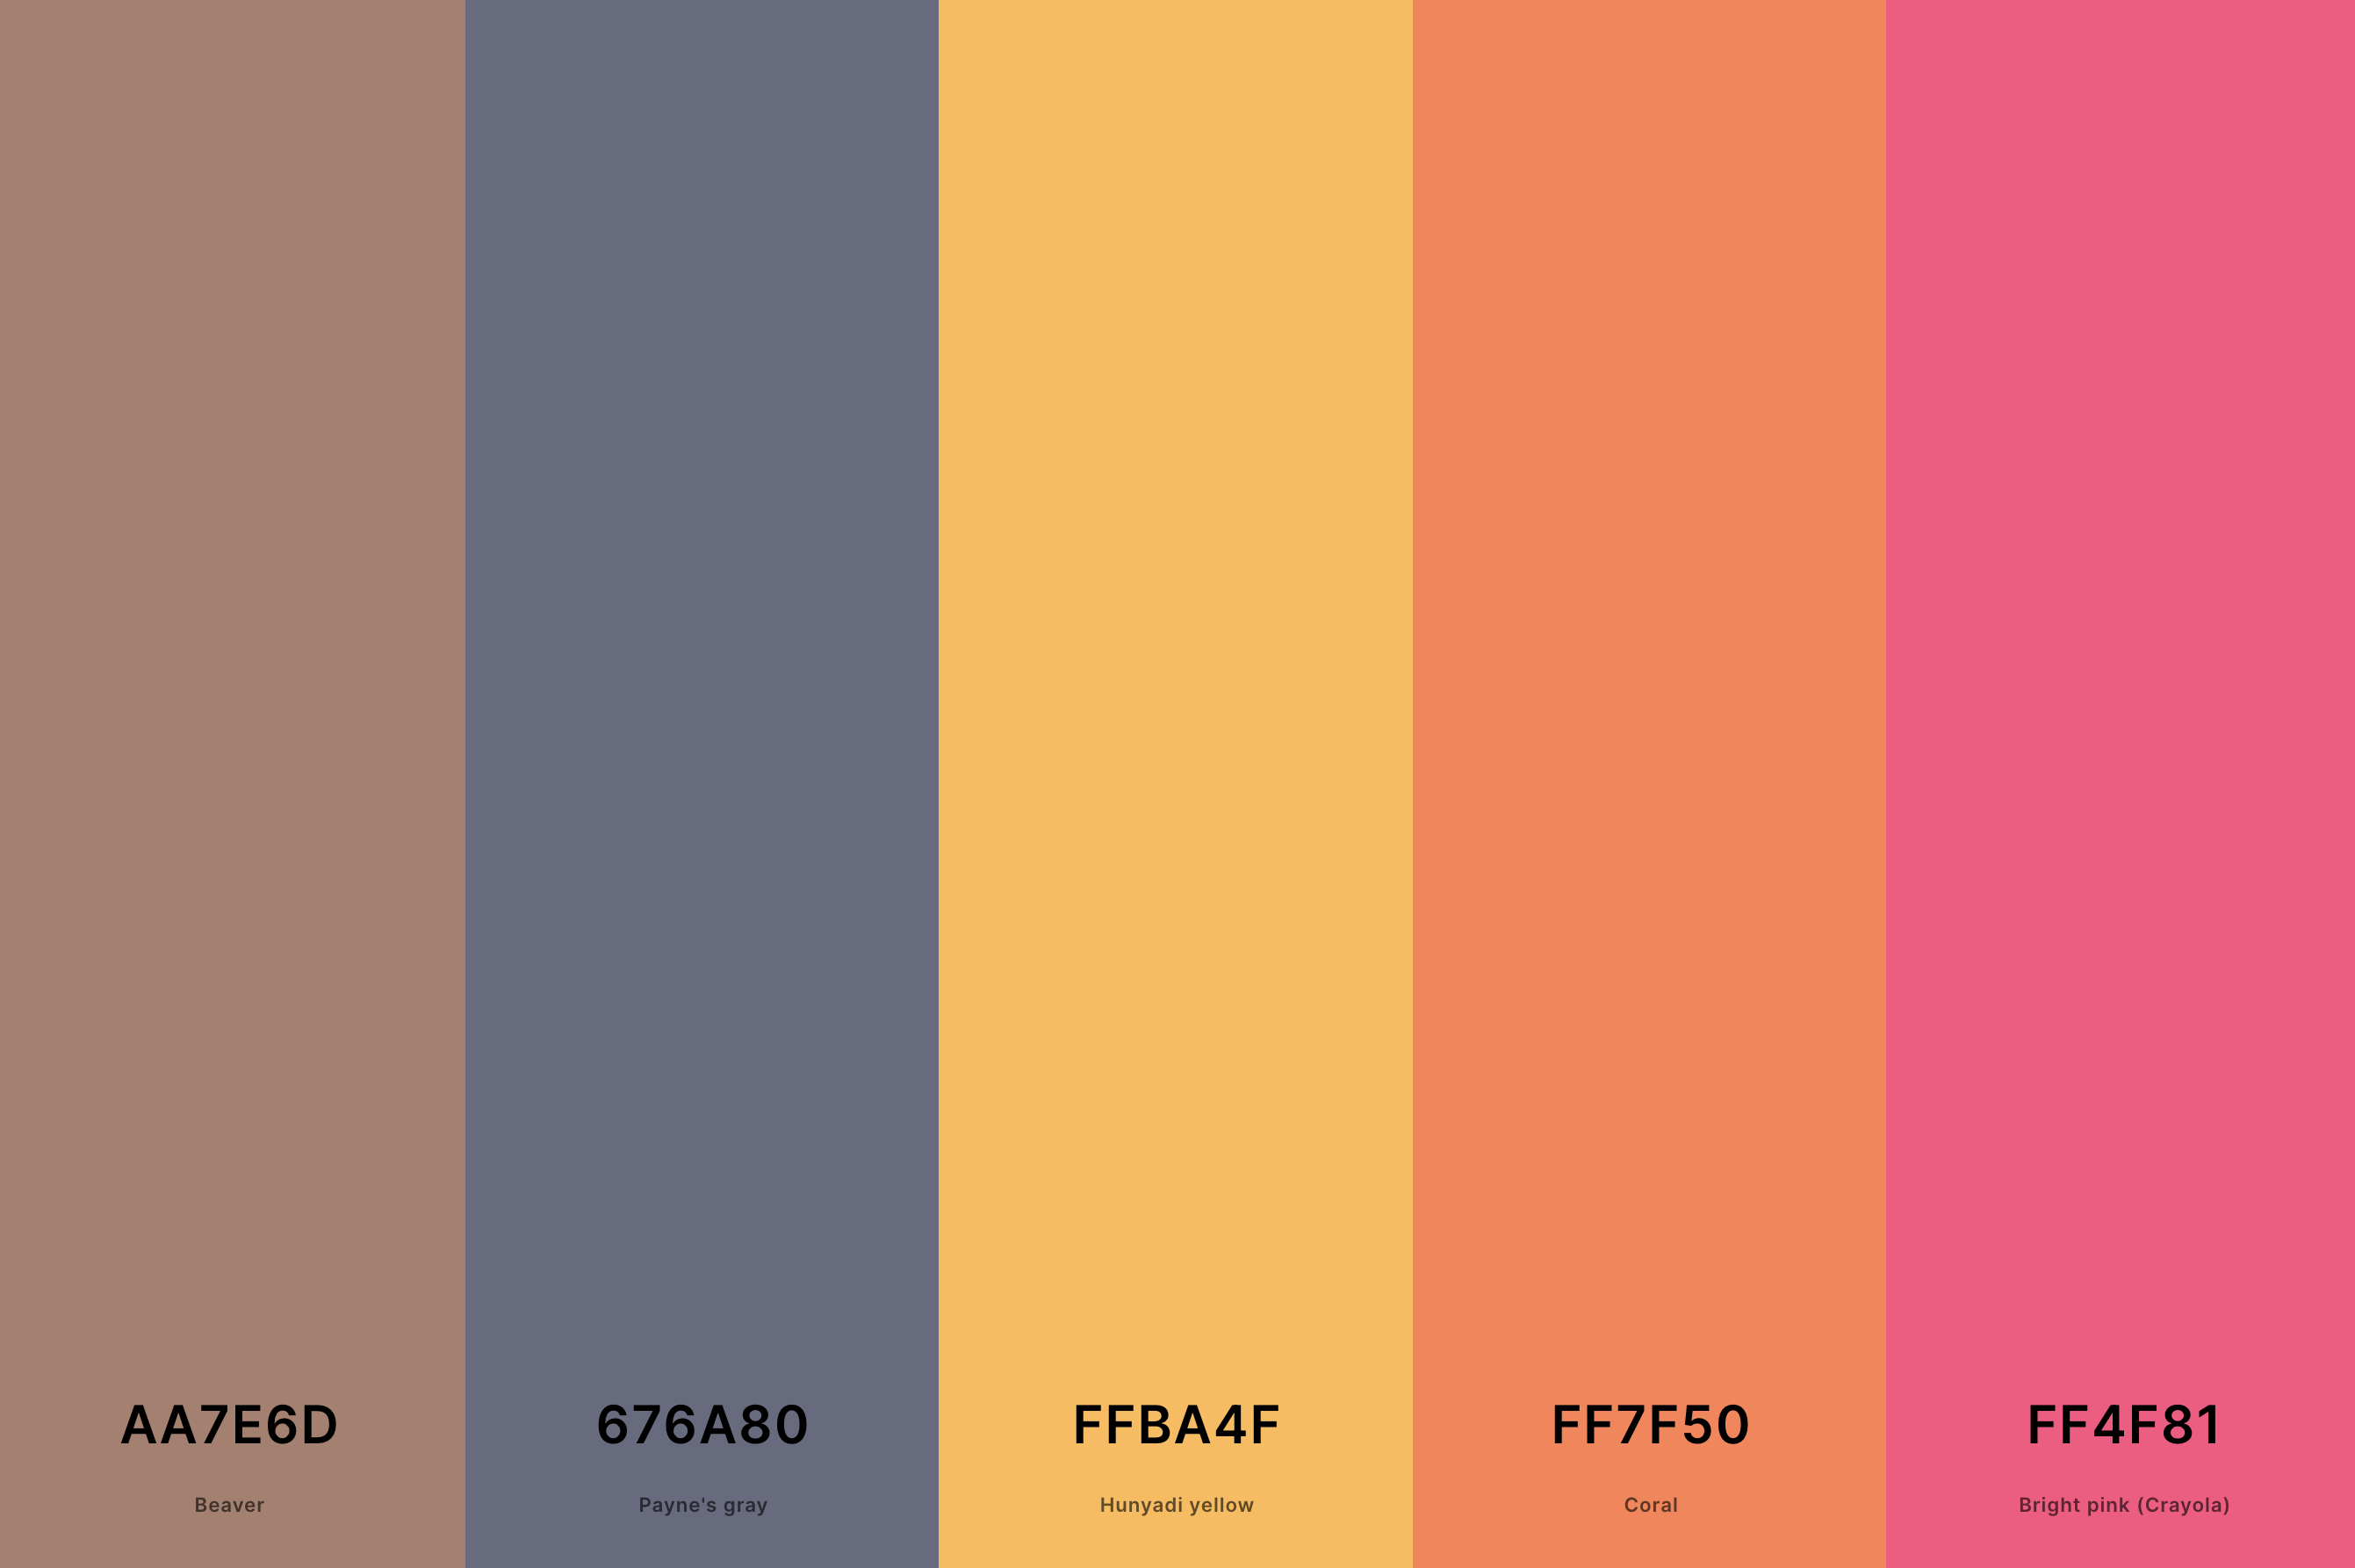 16. Coral Wedding Color Palette Color Palette with Beaver (Hex #AA7E6D) + Payne'S Gray (Hex #676A80) + Hunyadi Yellow (Hex #FFBA4F) + Coral (Hex #FF7F50) + Bright Pink (Crayola) (Hex #FF4F81) Color Palette with Hex Codes